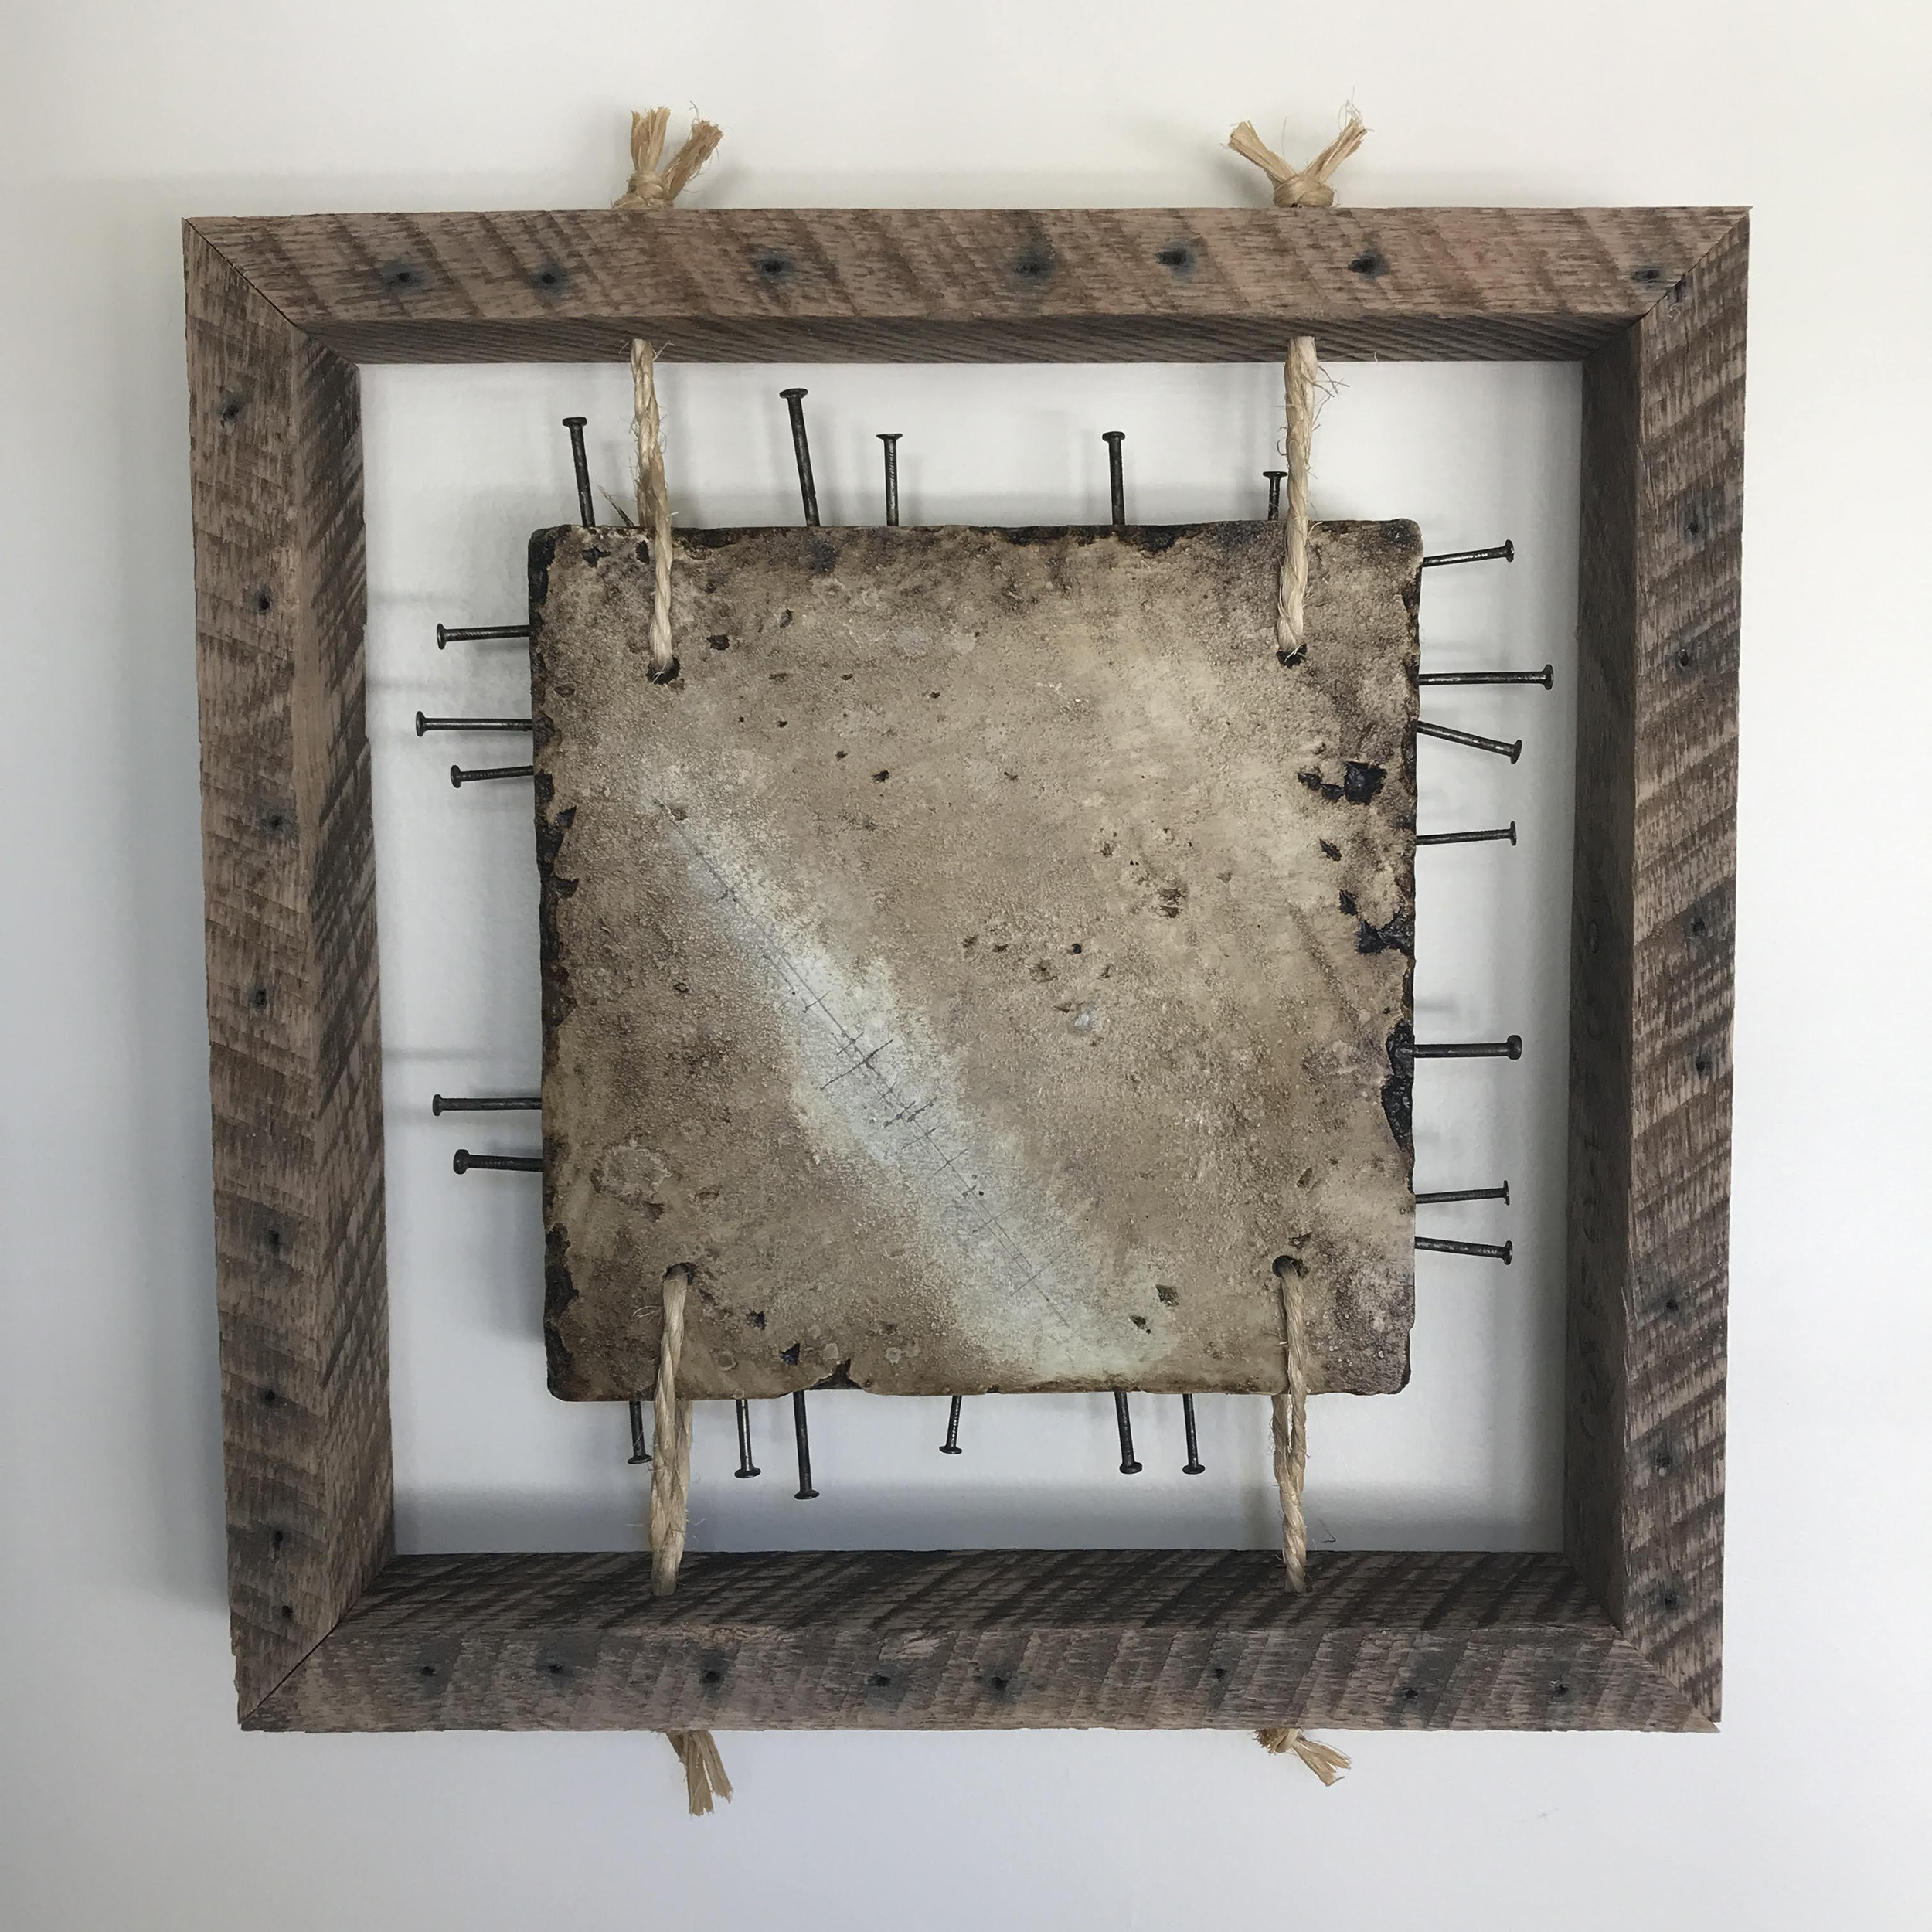 'Concrete Remnants, No.4' | apx. 16.5" x 16.5" x 2.5" | cement, wood, nails, wire mesh, twine, roofing tar, and oil stick